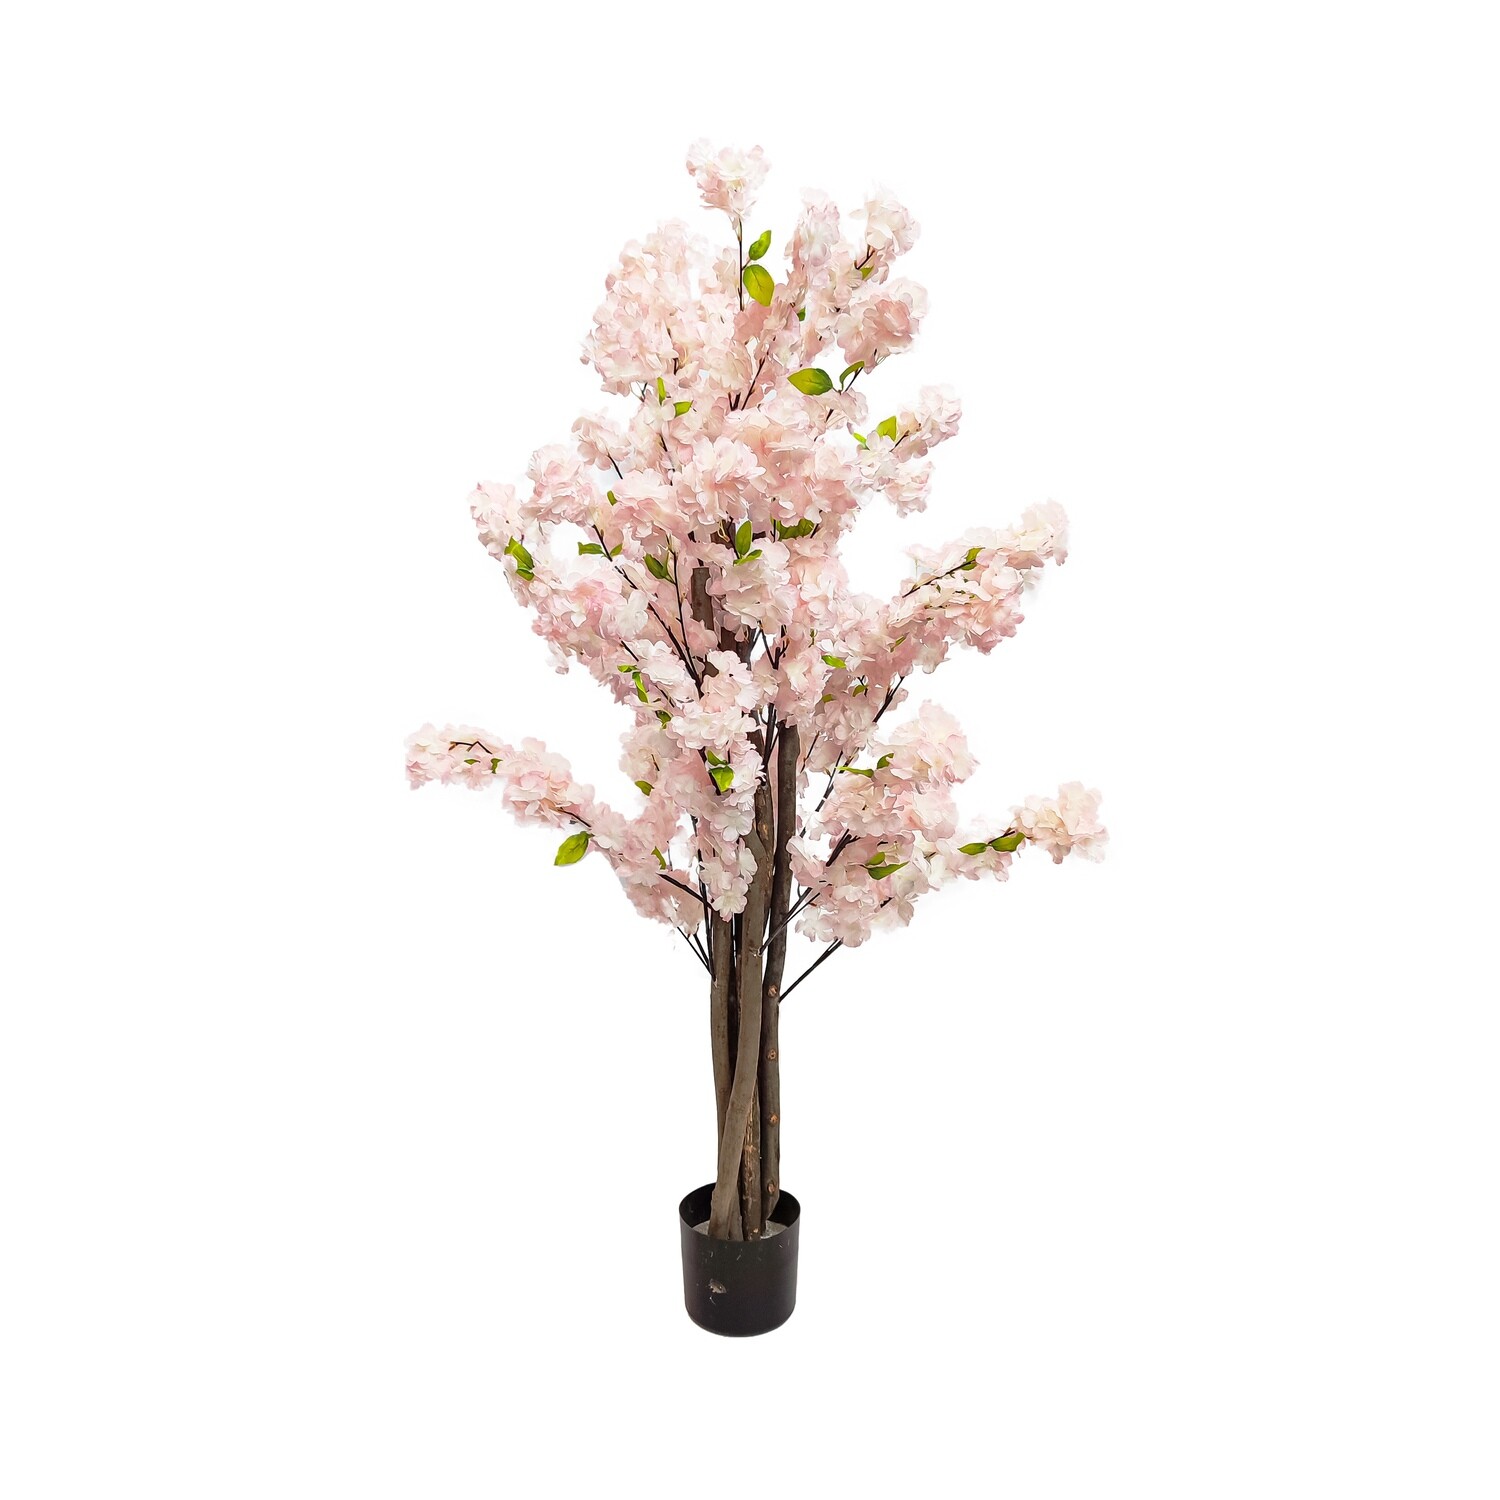 Vase decorations for your pleasure | Shop at Grandiflora today